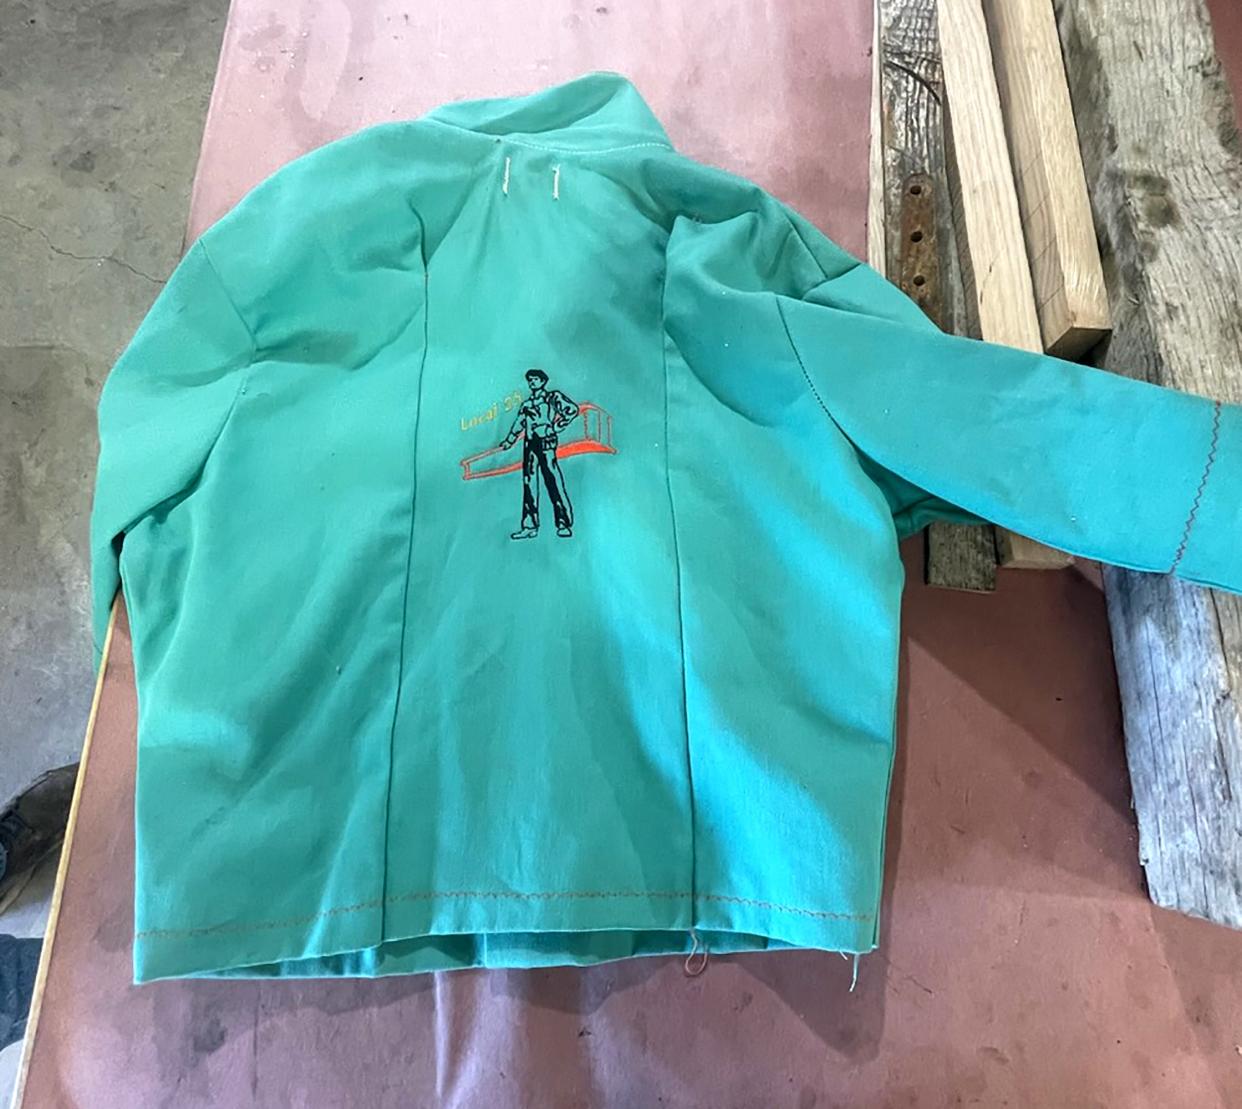 The welding jacket a young Tiffany Younk wore, which was made by her mom and embroidered with her name, for when she traveled to different projects with her dad.